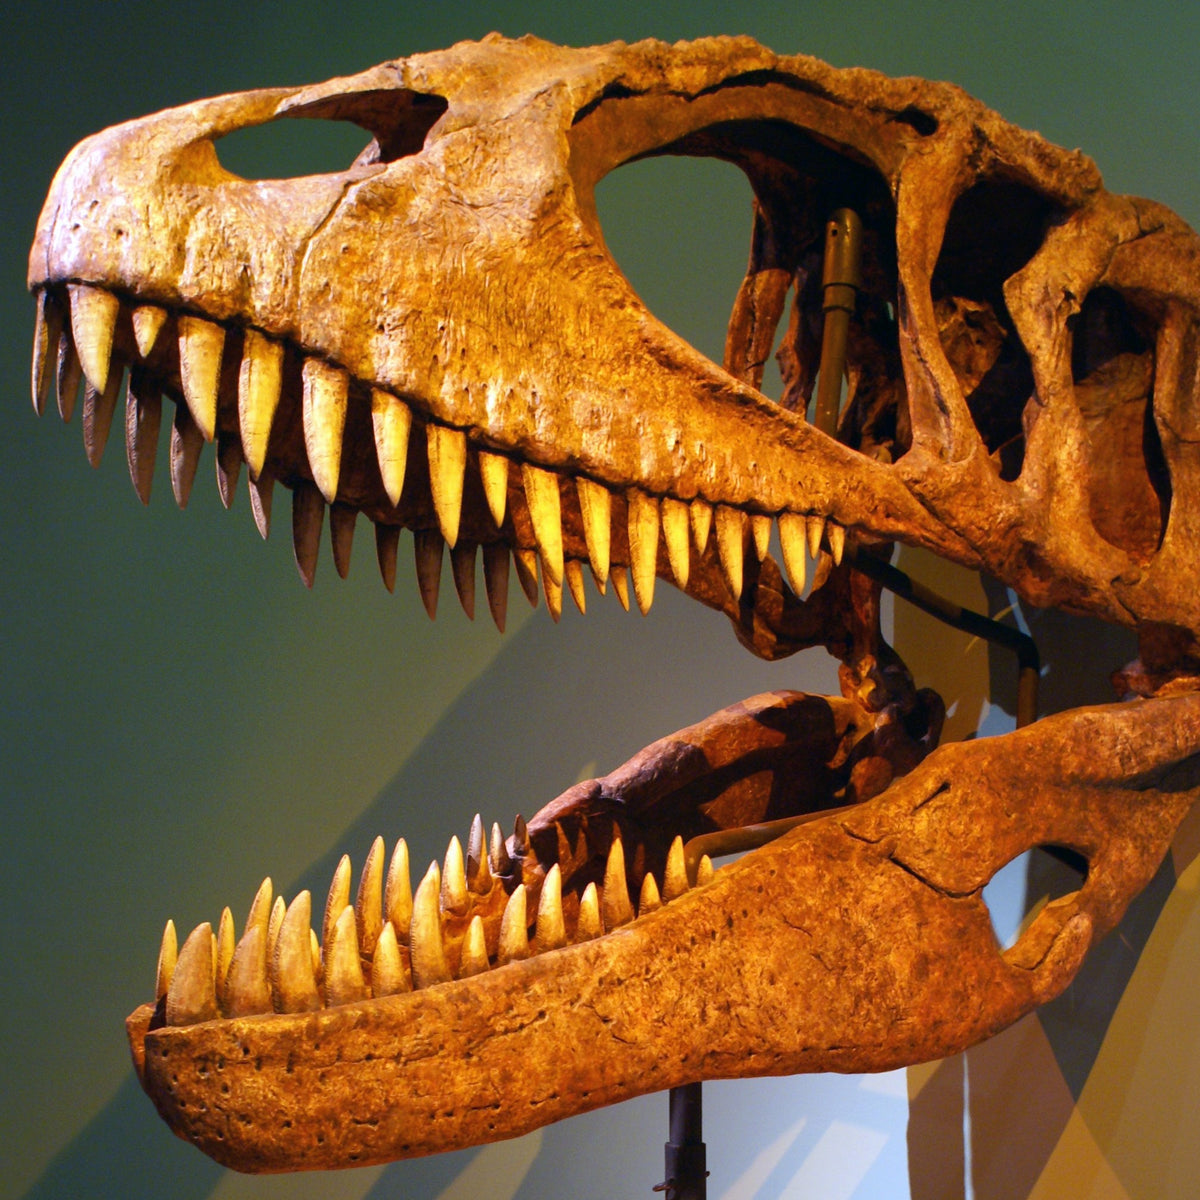 T. rex could have been 70% bigger than fossils suggest, new study